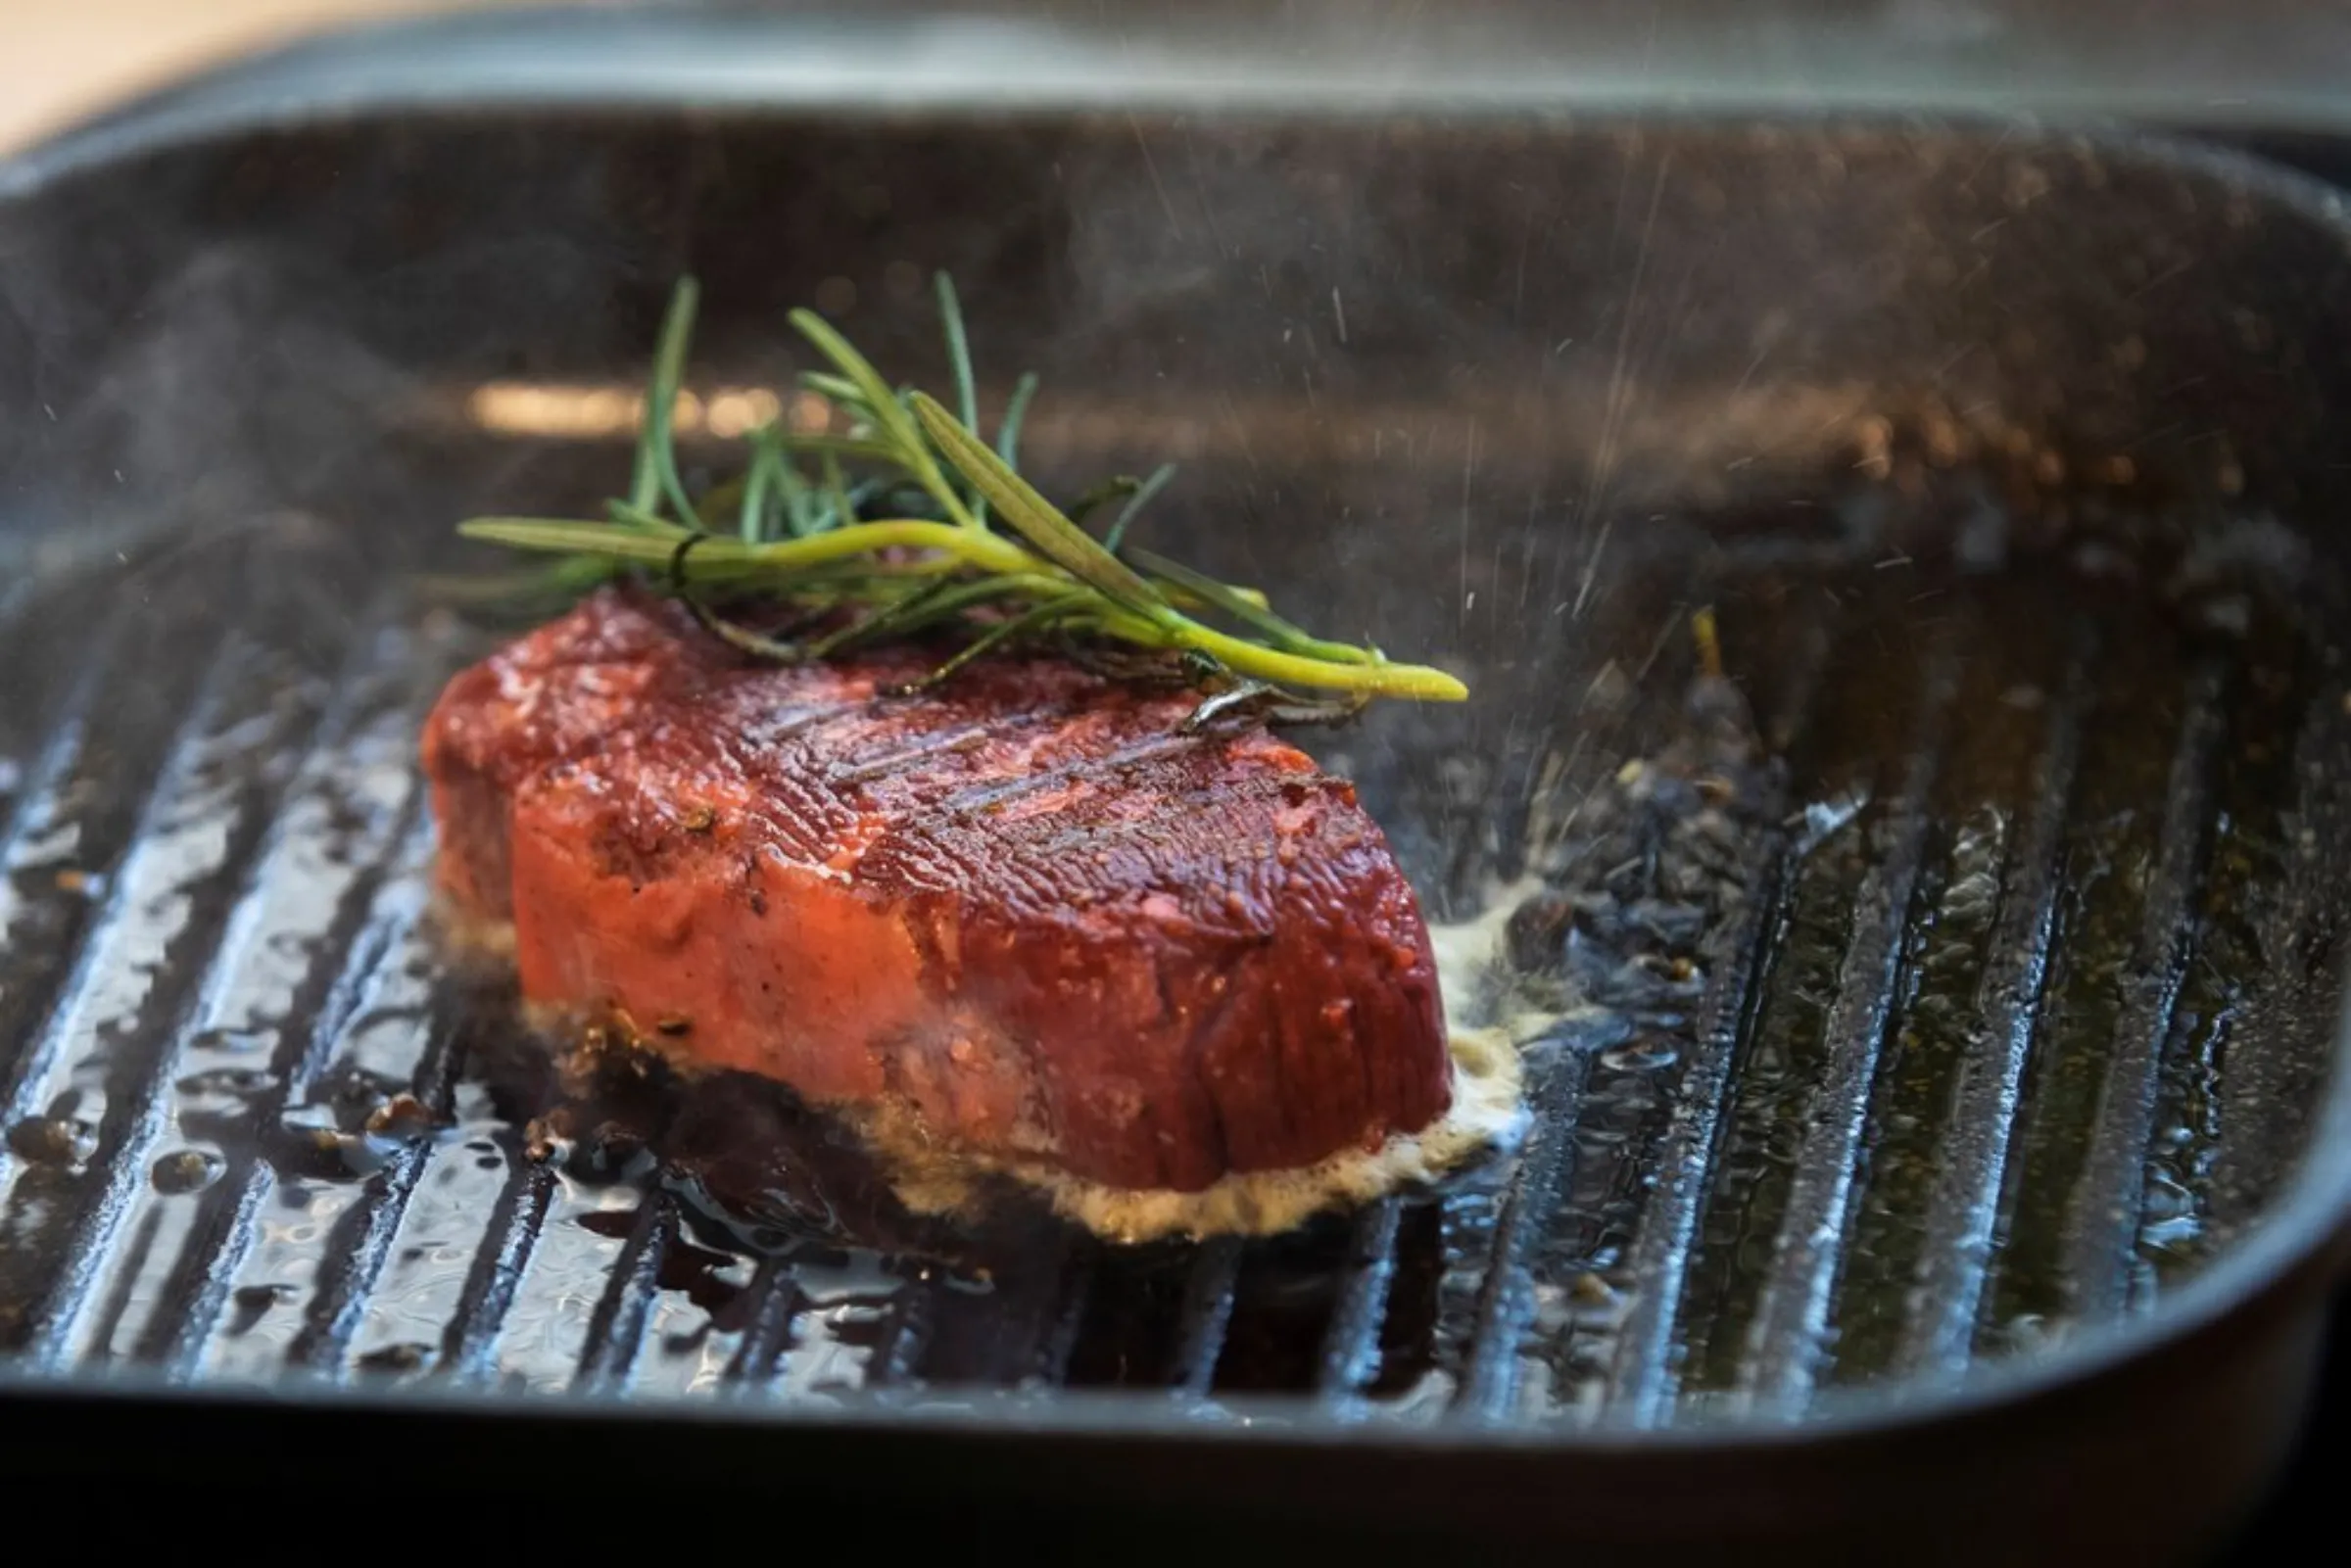 A 3D printed plant-based steak mimicking real beef and produced by Israeli start-up Redefine Meat is cooked during a demonstration for Reuters at their facility in Rehovot, Israel June 29, 2020